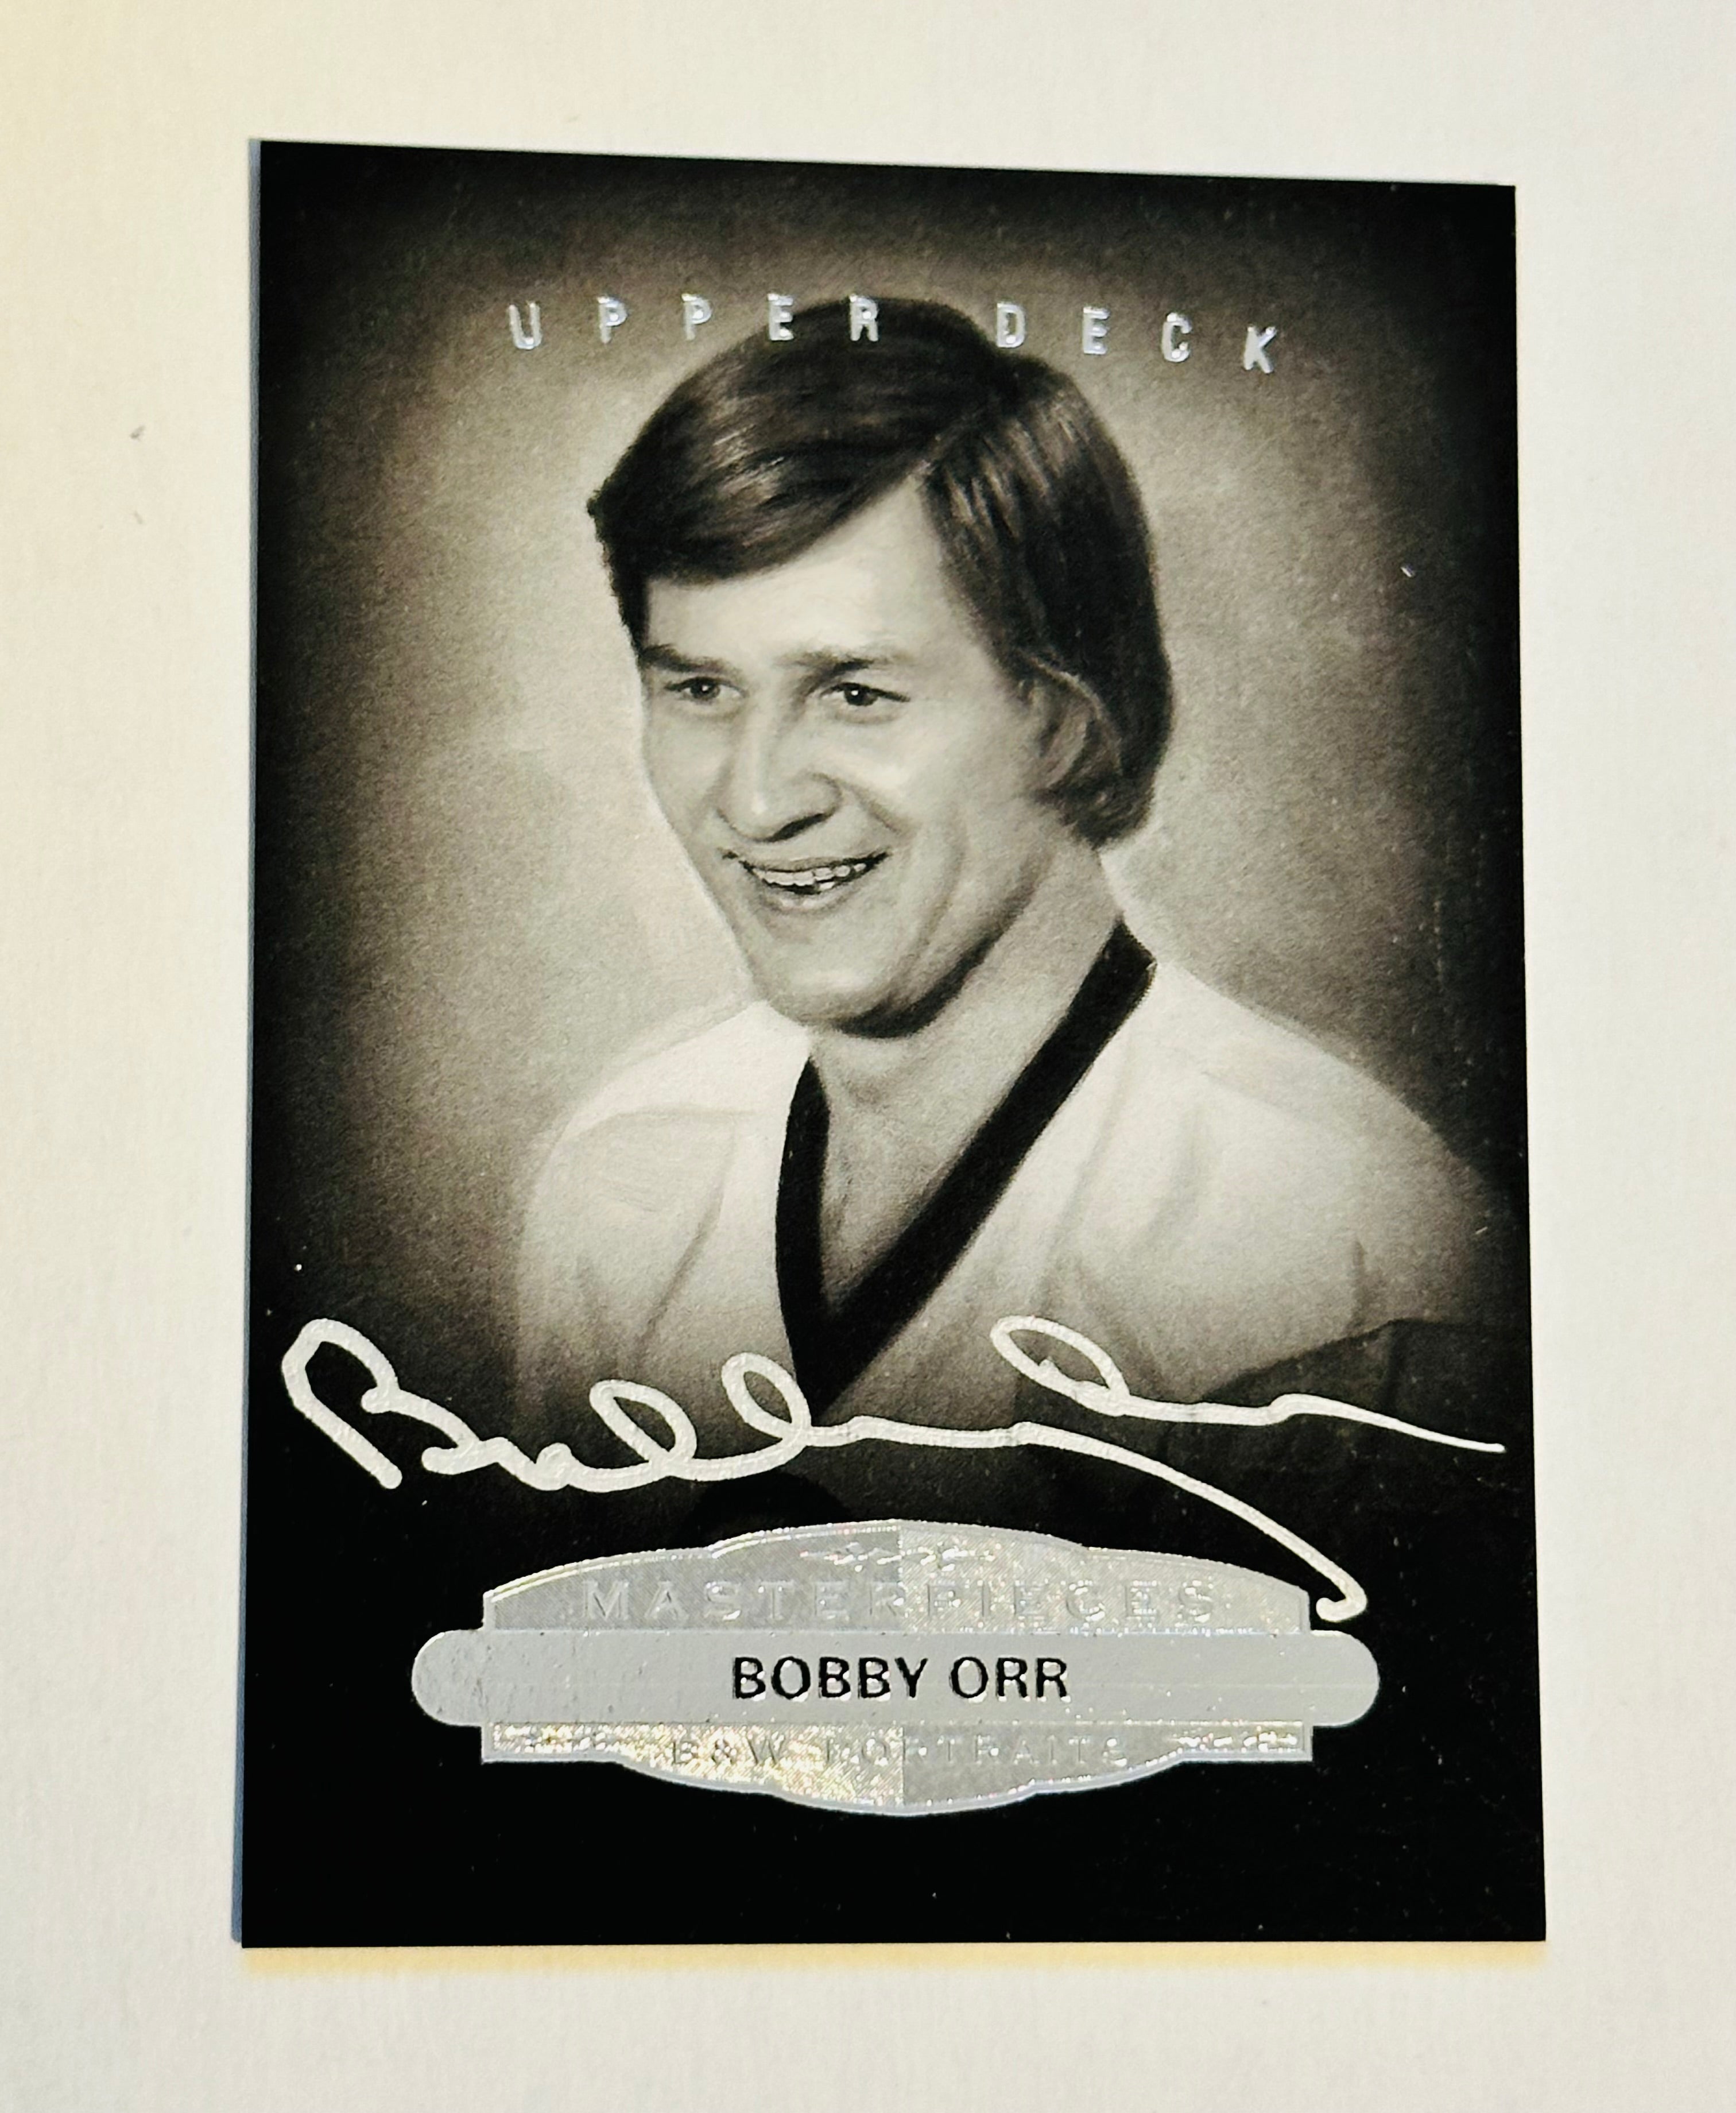 Bobby Orr Upper Deck portraits autographed insert hockey card certified by Upperdeck 2015